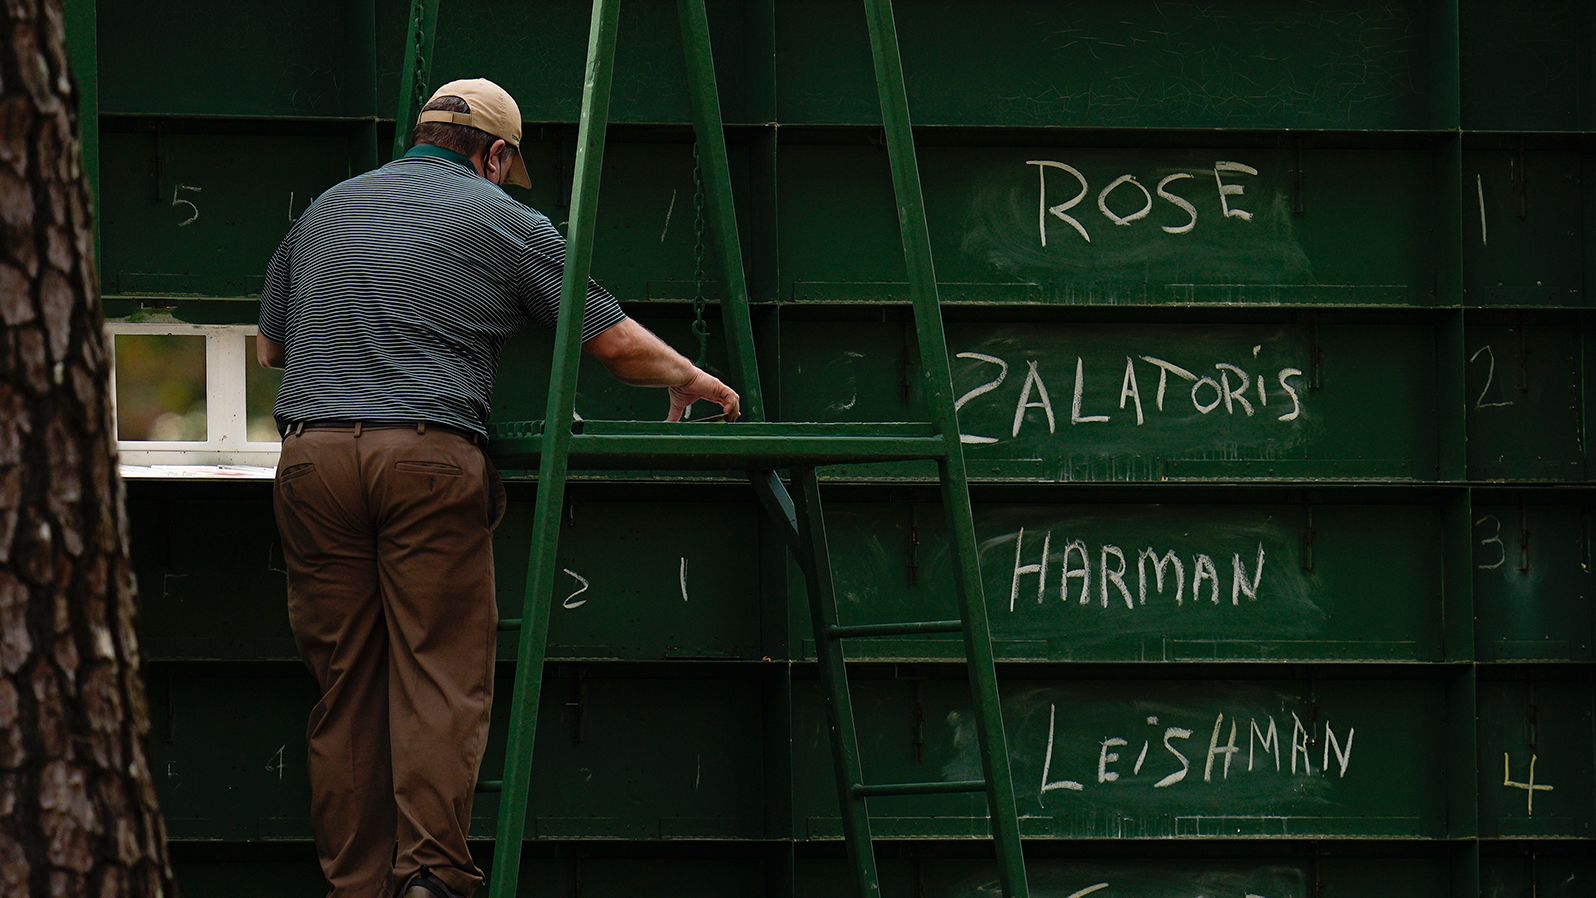 An attendant adjusts scores from behind a leaderboard on Saturday.